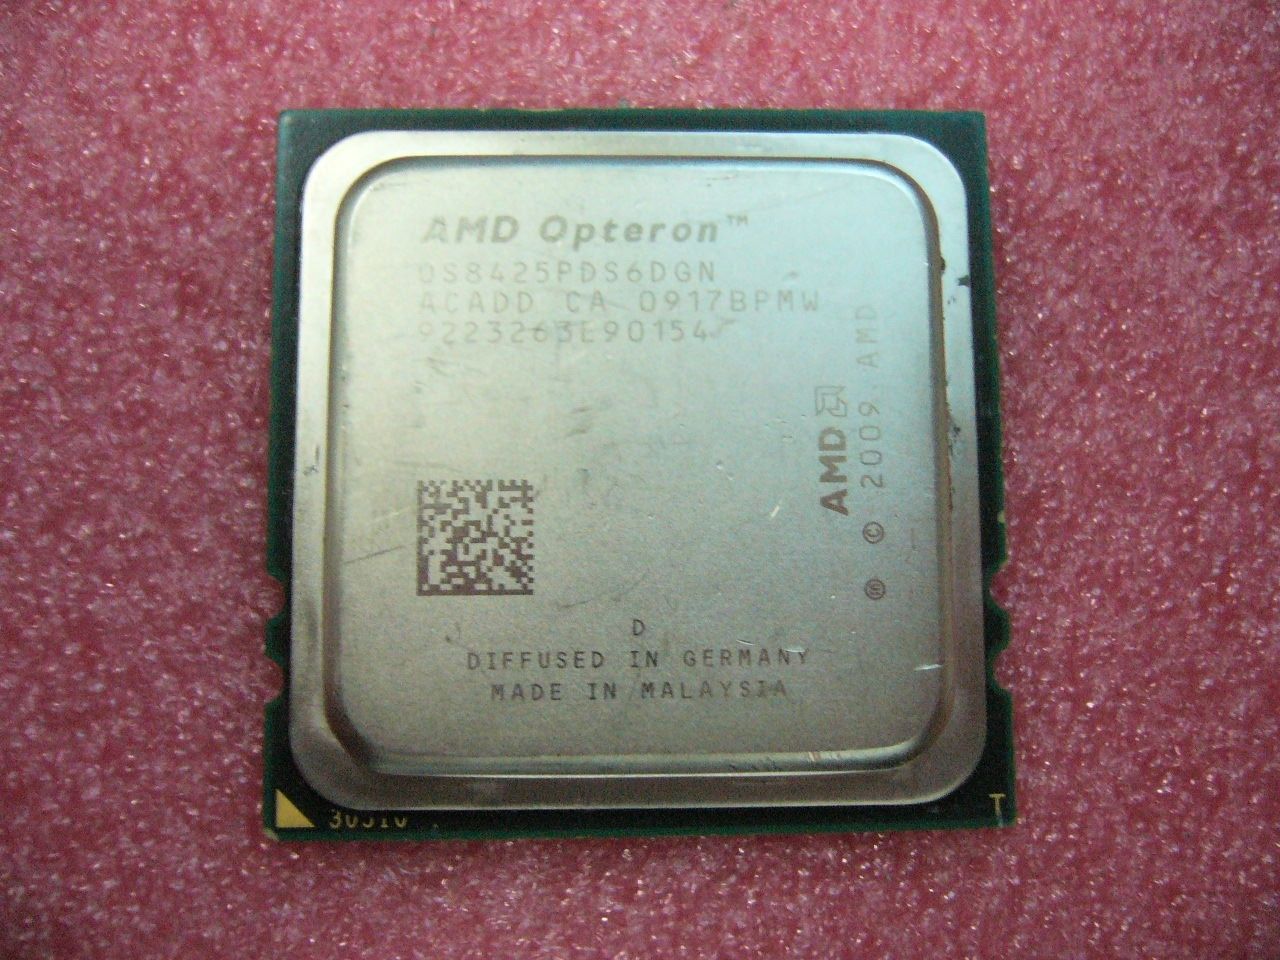 QTY 1x AMD Opteron 8425 2.1 GHz Six Core (OS8425PDS6DGN) CPU Socket F 1207